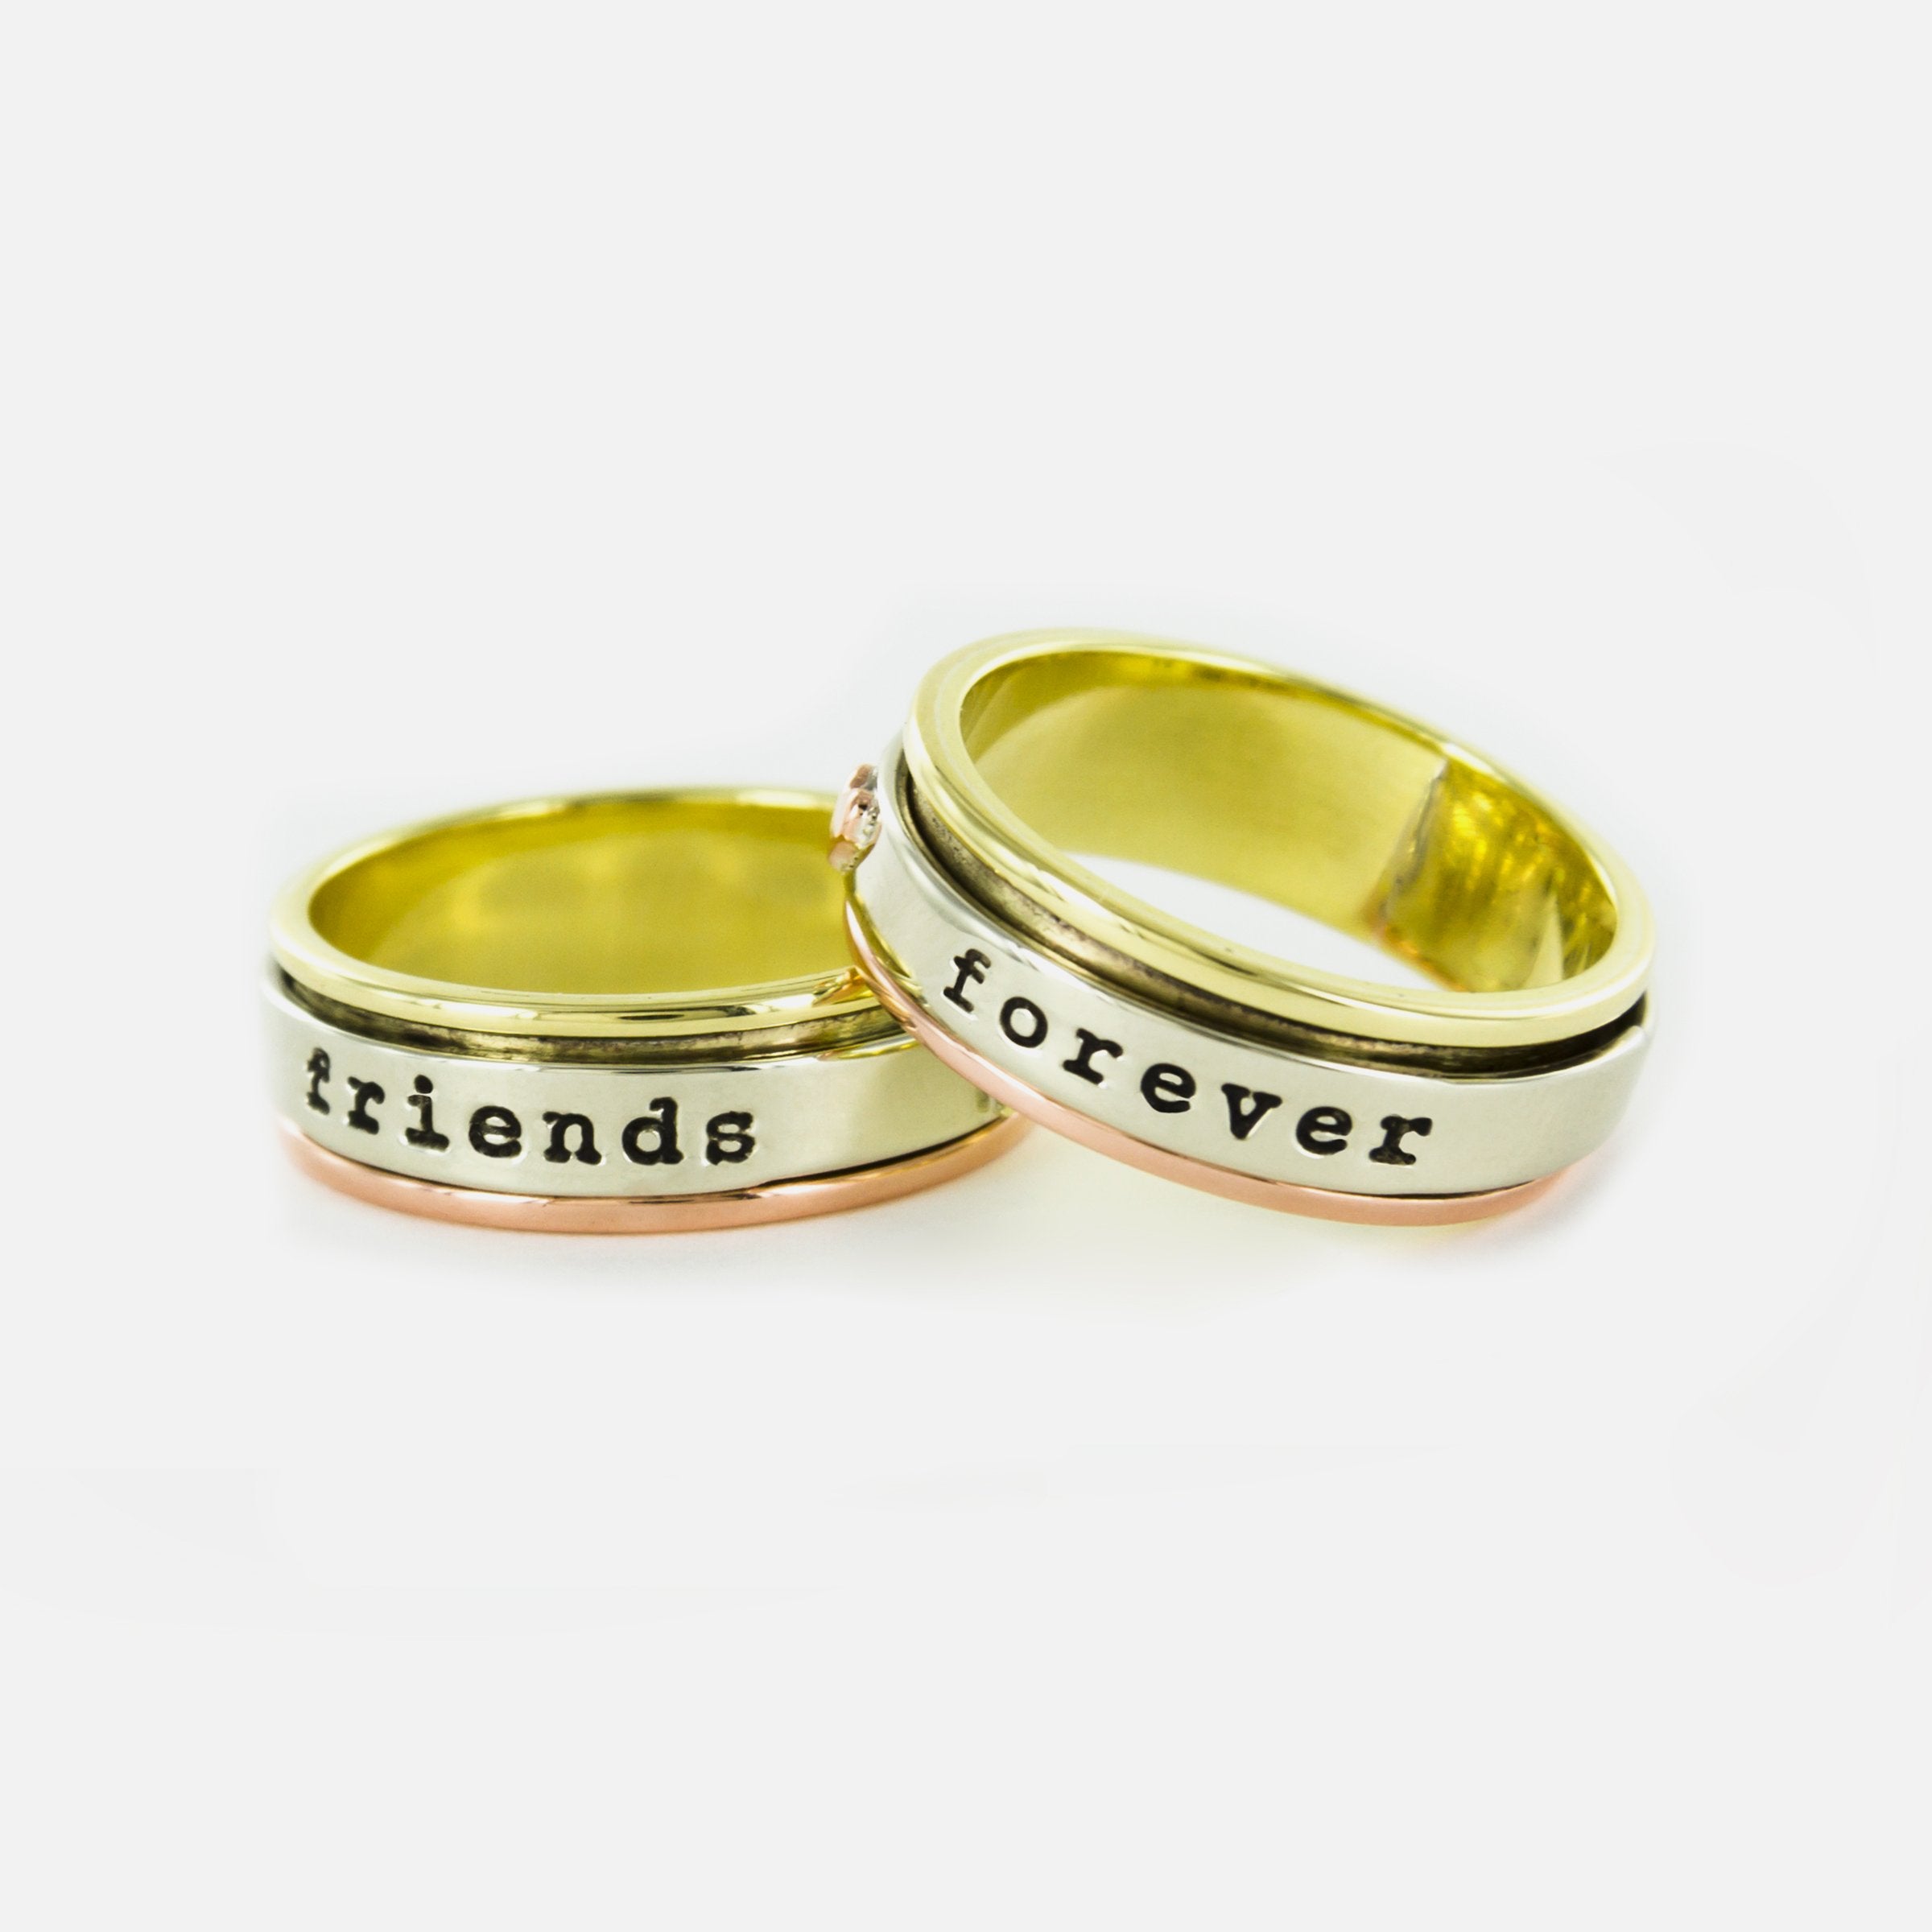 Friends Forever Mixed Metals Spinning Ring - 9